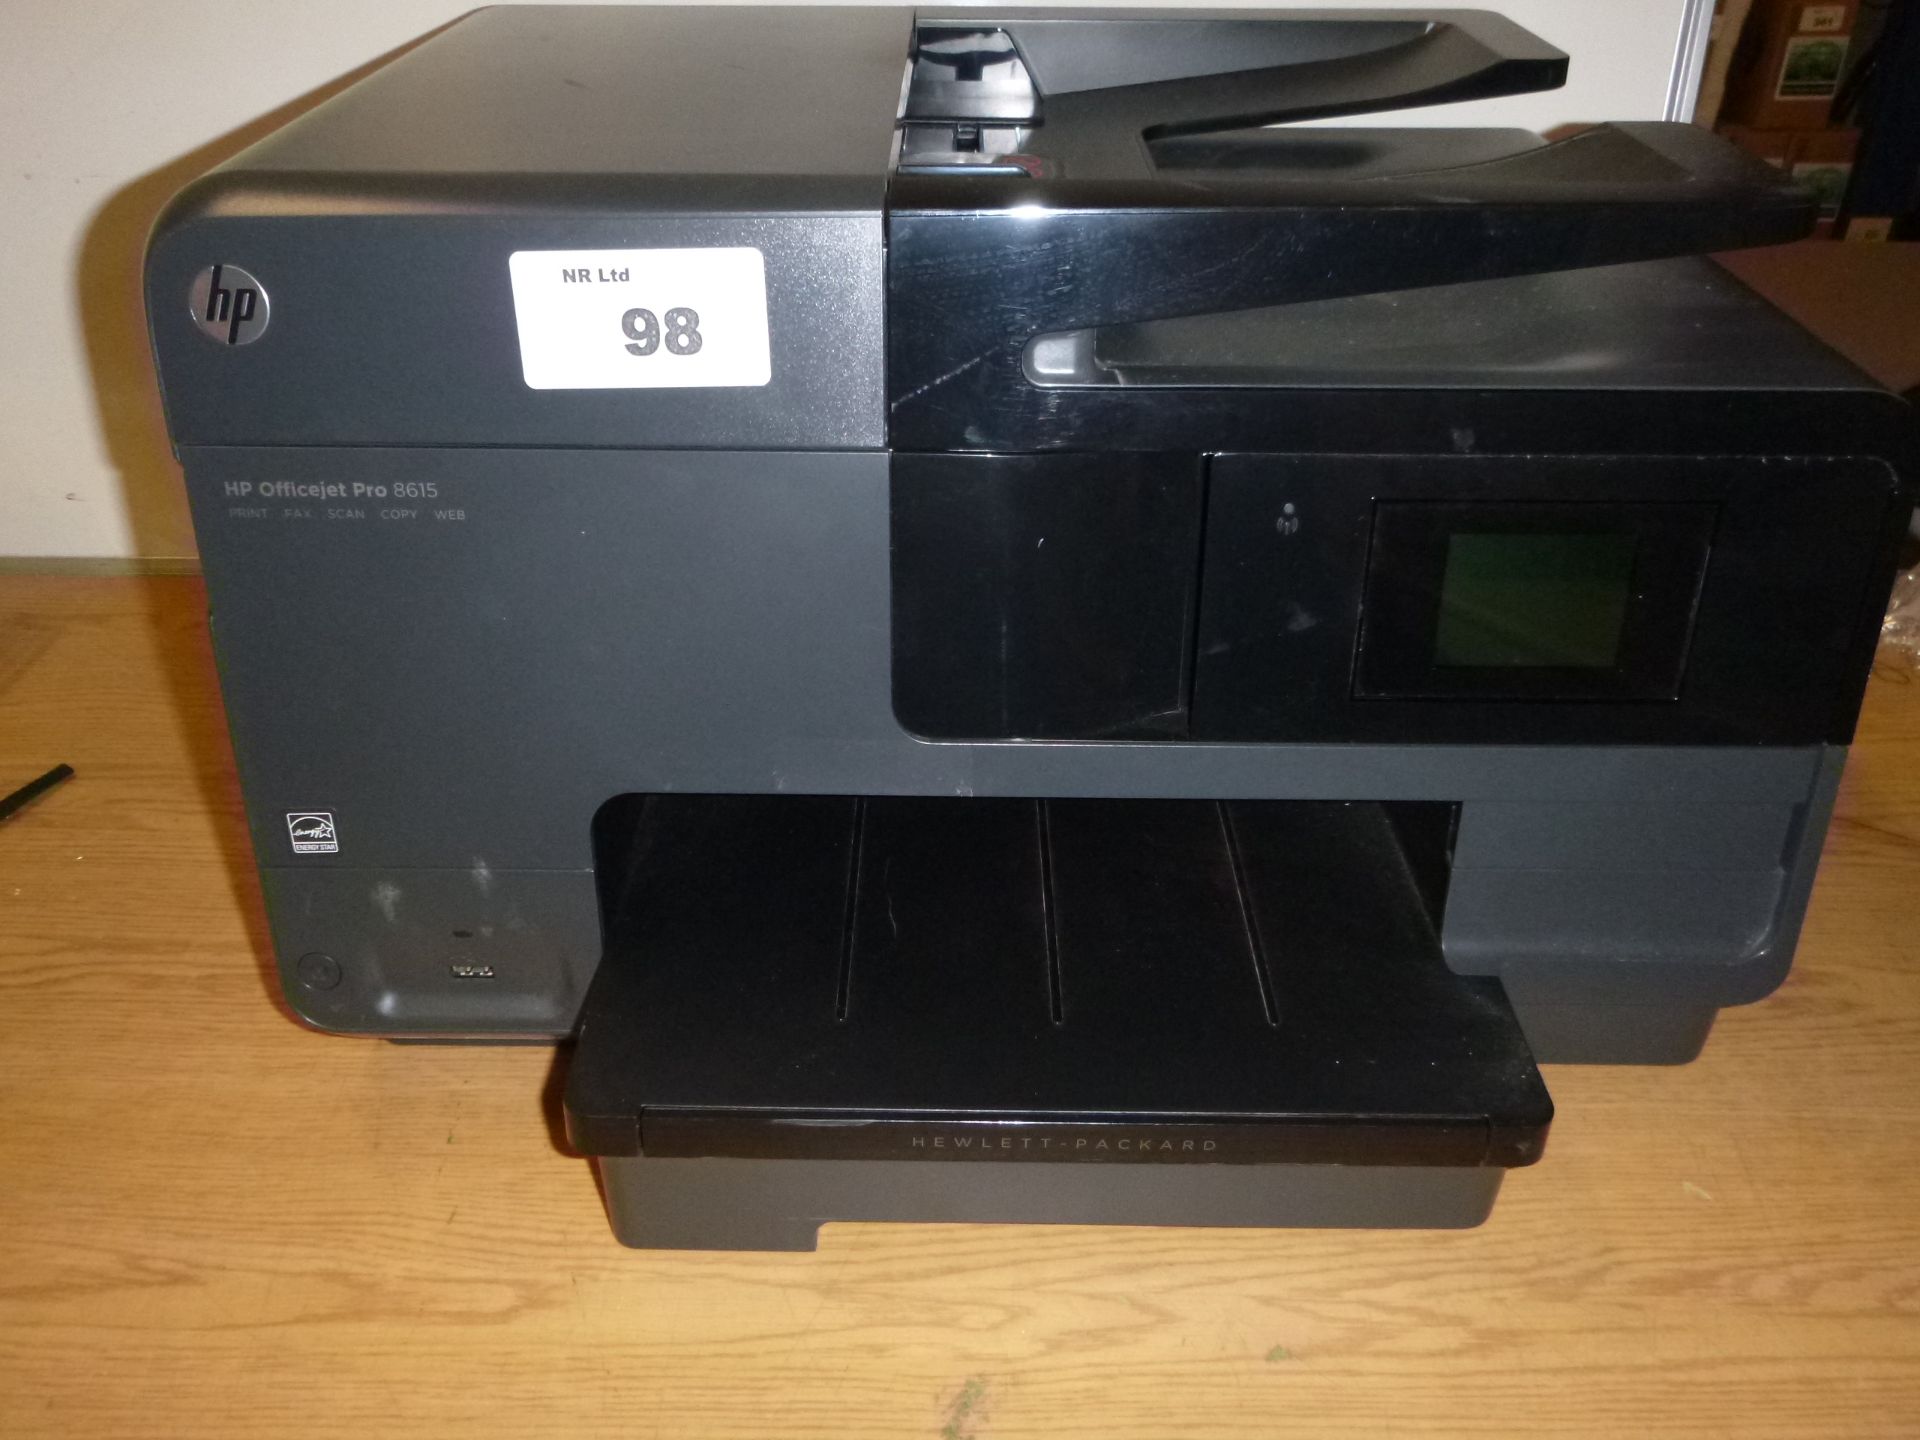 HP OFFICEJET PRO 8615 MULTIFUNCTION COLOUR PRINTER. PRINT/FAX/SCAN/COPY/WEB. WITH TEST PRINT